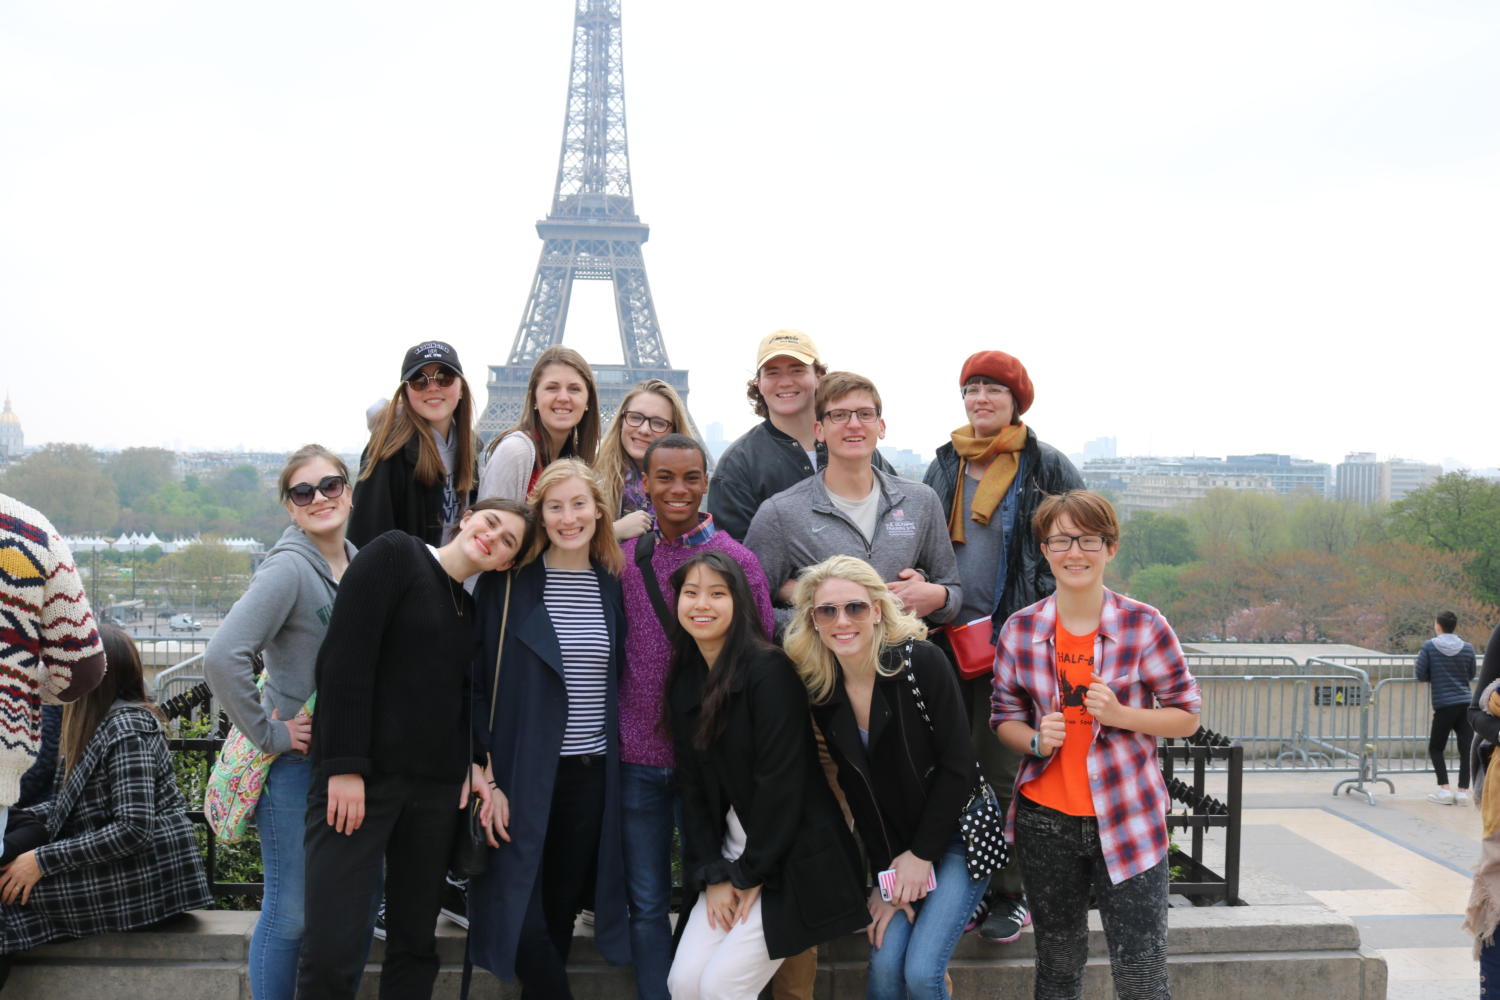 France explorers pay a visit to the iconic Eiffel Tower upon departing from Charles De Gaulle Airport.